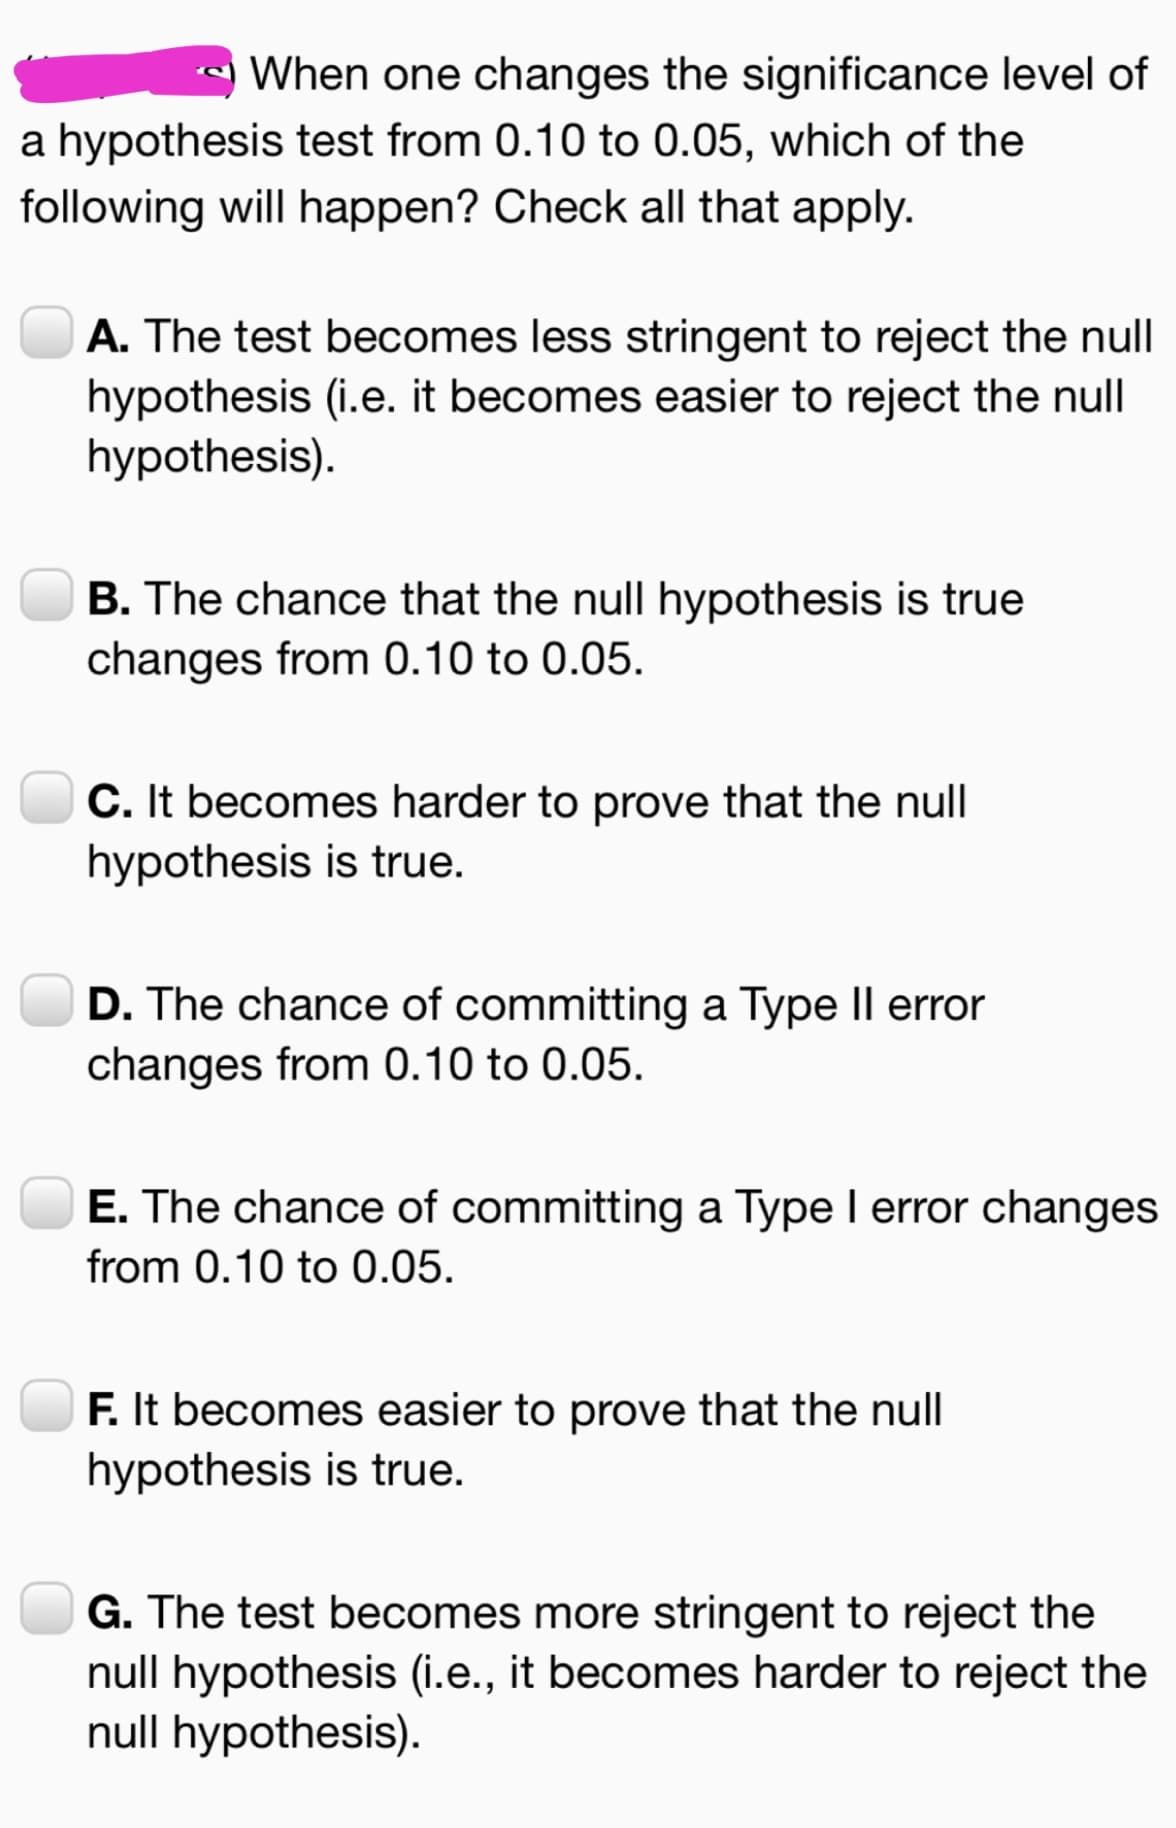 When one changes the significance level of
a hypothesis test from 0.10 to 0.05, which of the
following will happen? Check all that apply.
A. The test becomes less stringent to reject the null
hypothesis (i.e. it becomes easier to reject the null
hypothesis).
B. The chance that the null hypothesis is true
changes from 0.10 to 0.05.
C. It becomes harder to prove that the null
hypothesis is true.
D. The chance of committing a Type II error
changes from 0.10 to 0.05.
E. The chance of committing a Type I error changes
from 0.10 to 0.05.
F. It becomes easier to prove that the null
hypothesis is true.
G. The test becomes more stringent to reject the
null hypothesis (i.e., it becomes harder to reject the
null hypothesis).
